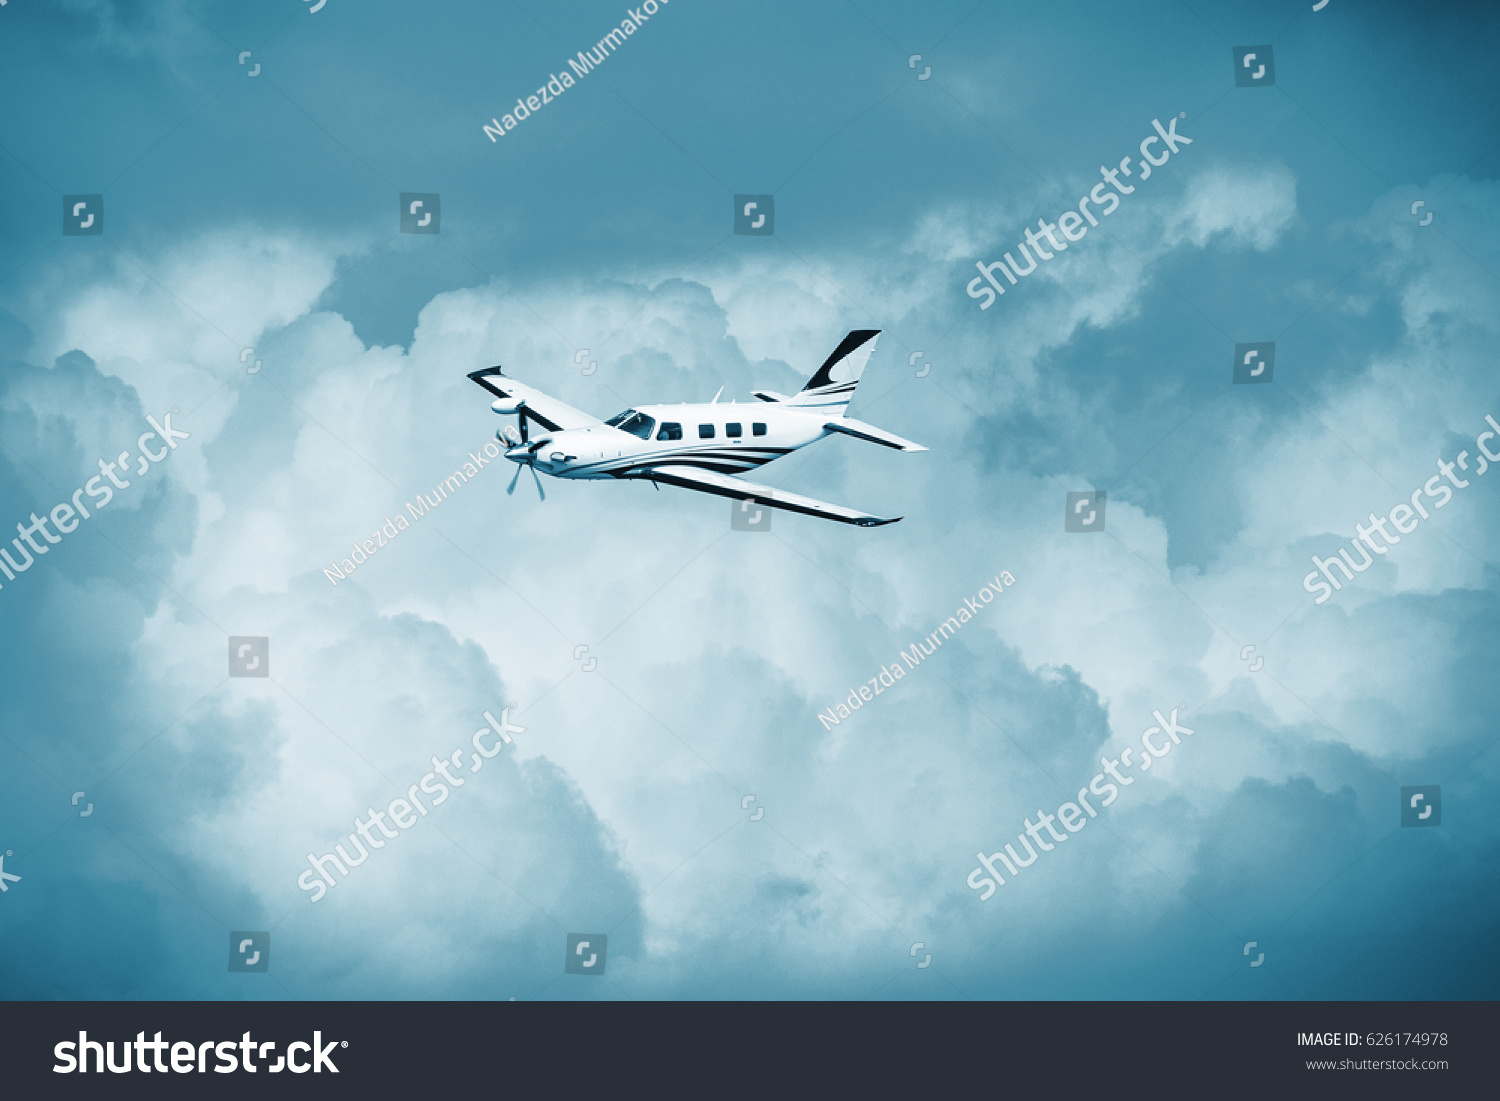 Single piston aircraft. Single-propeller aircraft flying over the blue sky. Single turboprop aircraft.. Small private plane flying in blue clouds. #626174978